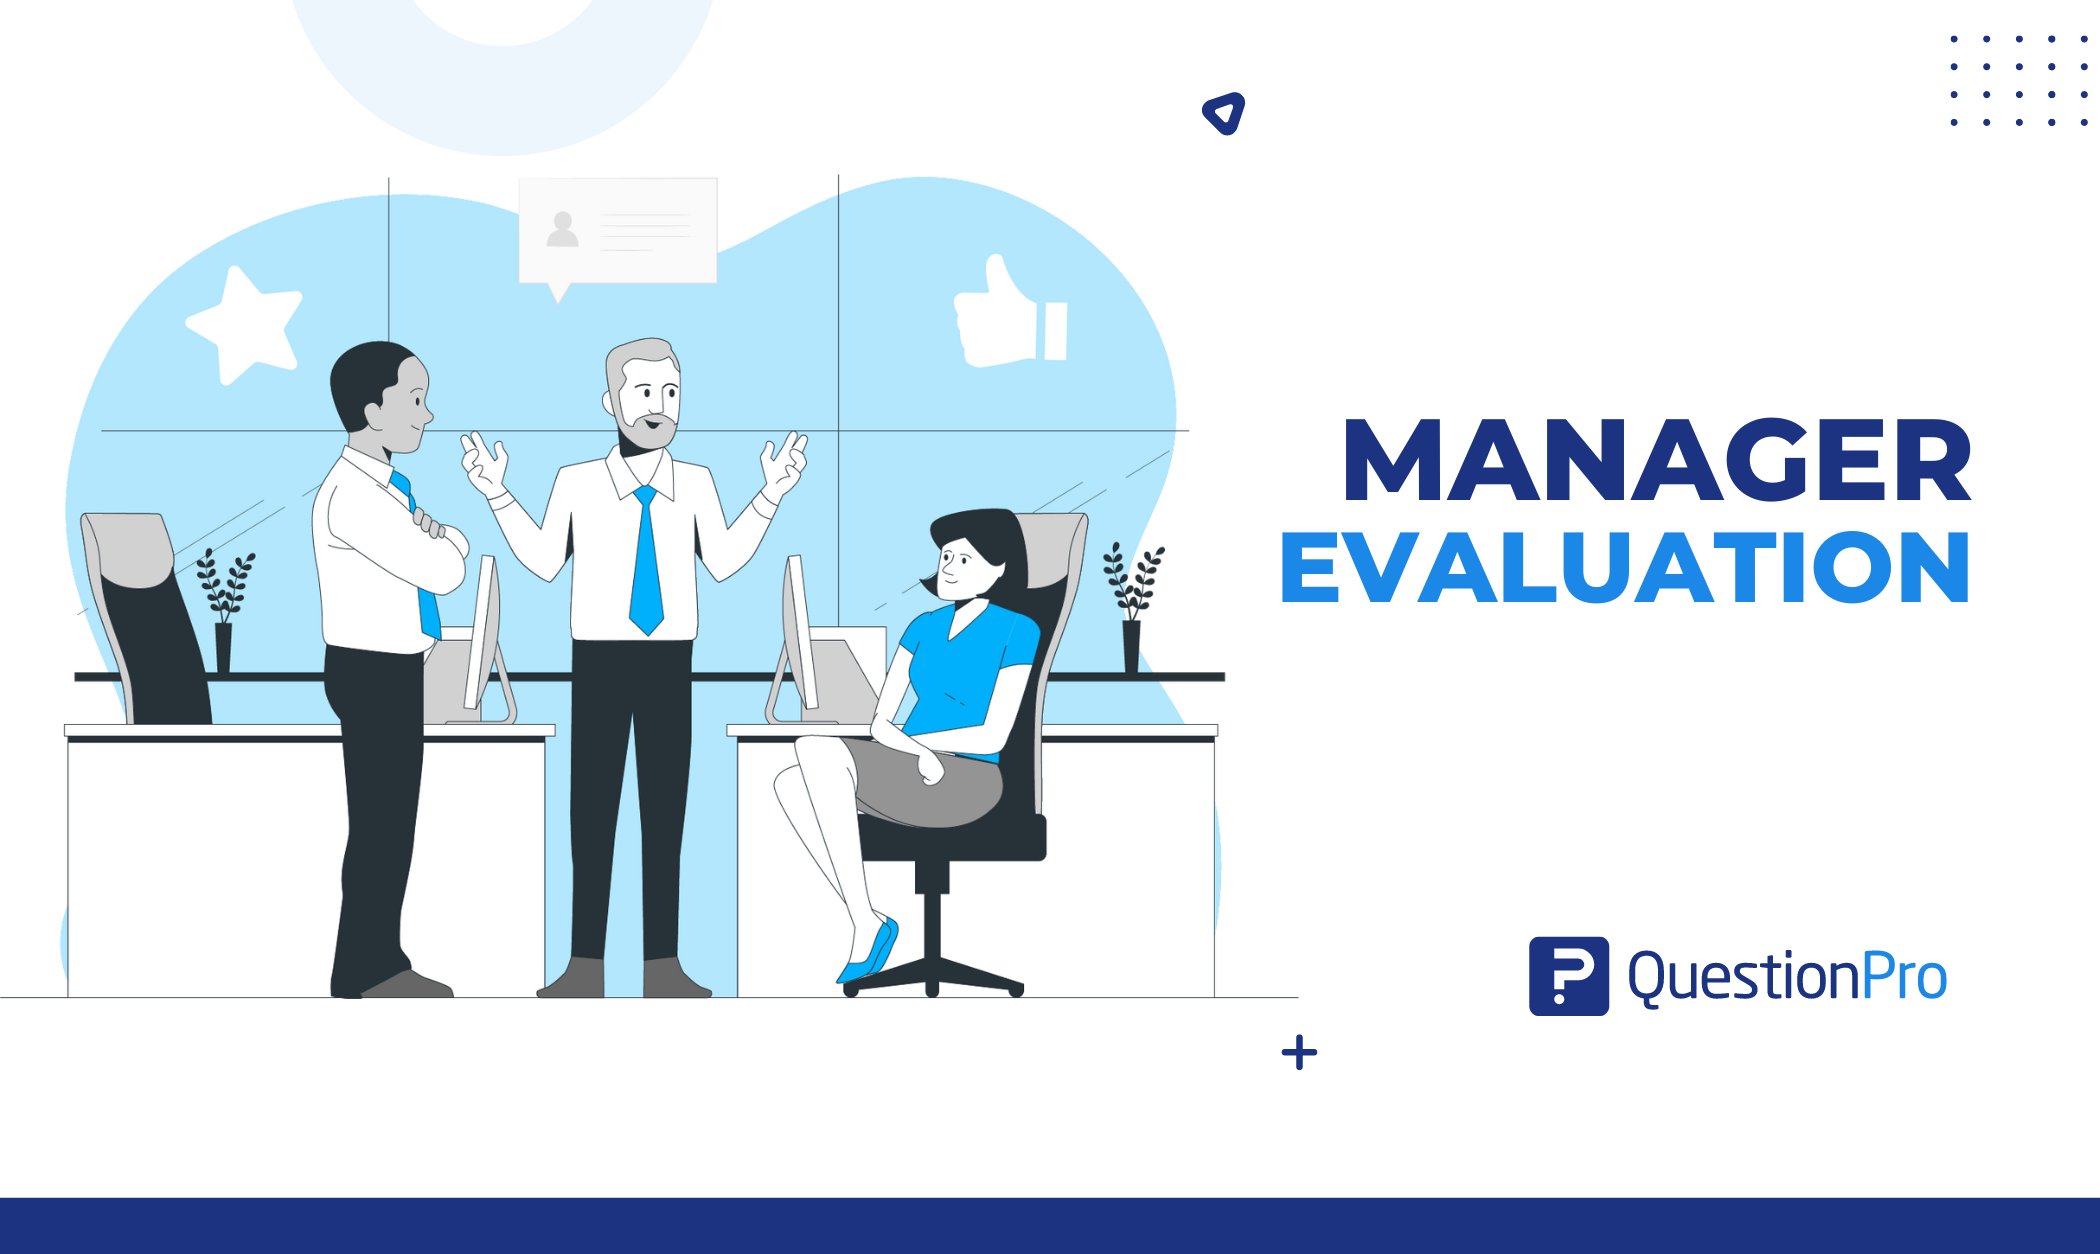 Improved Candidate Management, Evaluation, and Communication